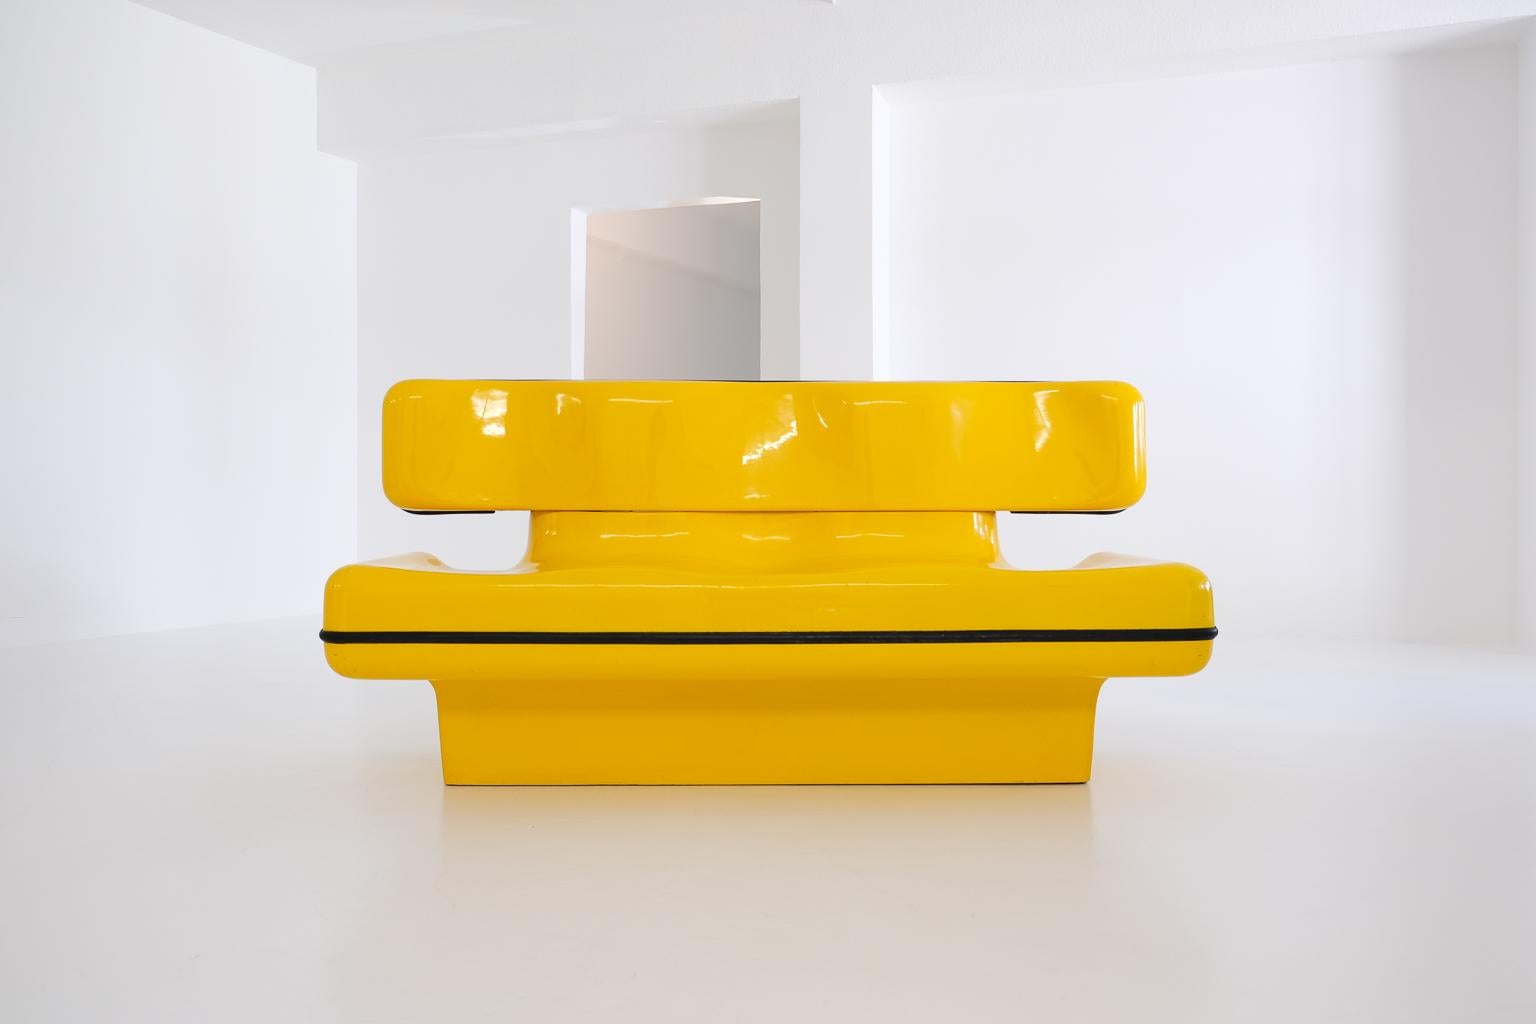 this 3-seater bench was designed around 1970 by dominique prevot and jean-luc favriau and produced by edition france design. that’s about all we know about these benches and their designers (and that there are different spellings of their names.)